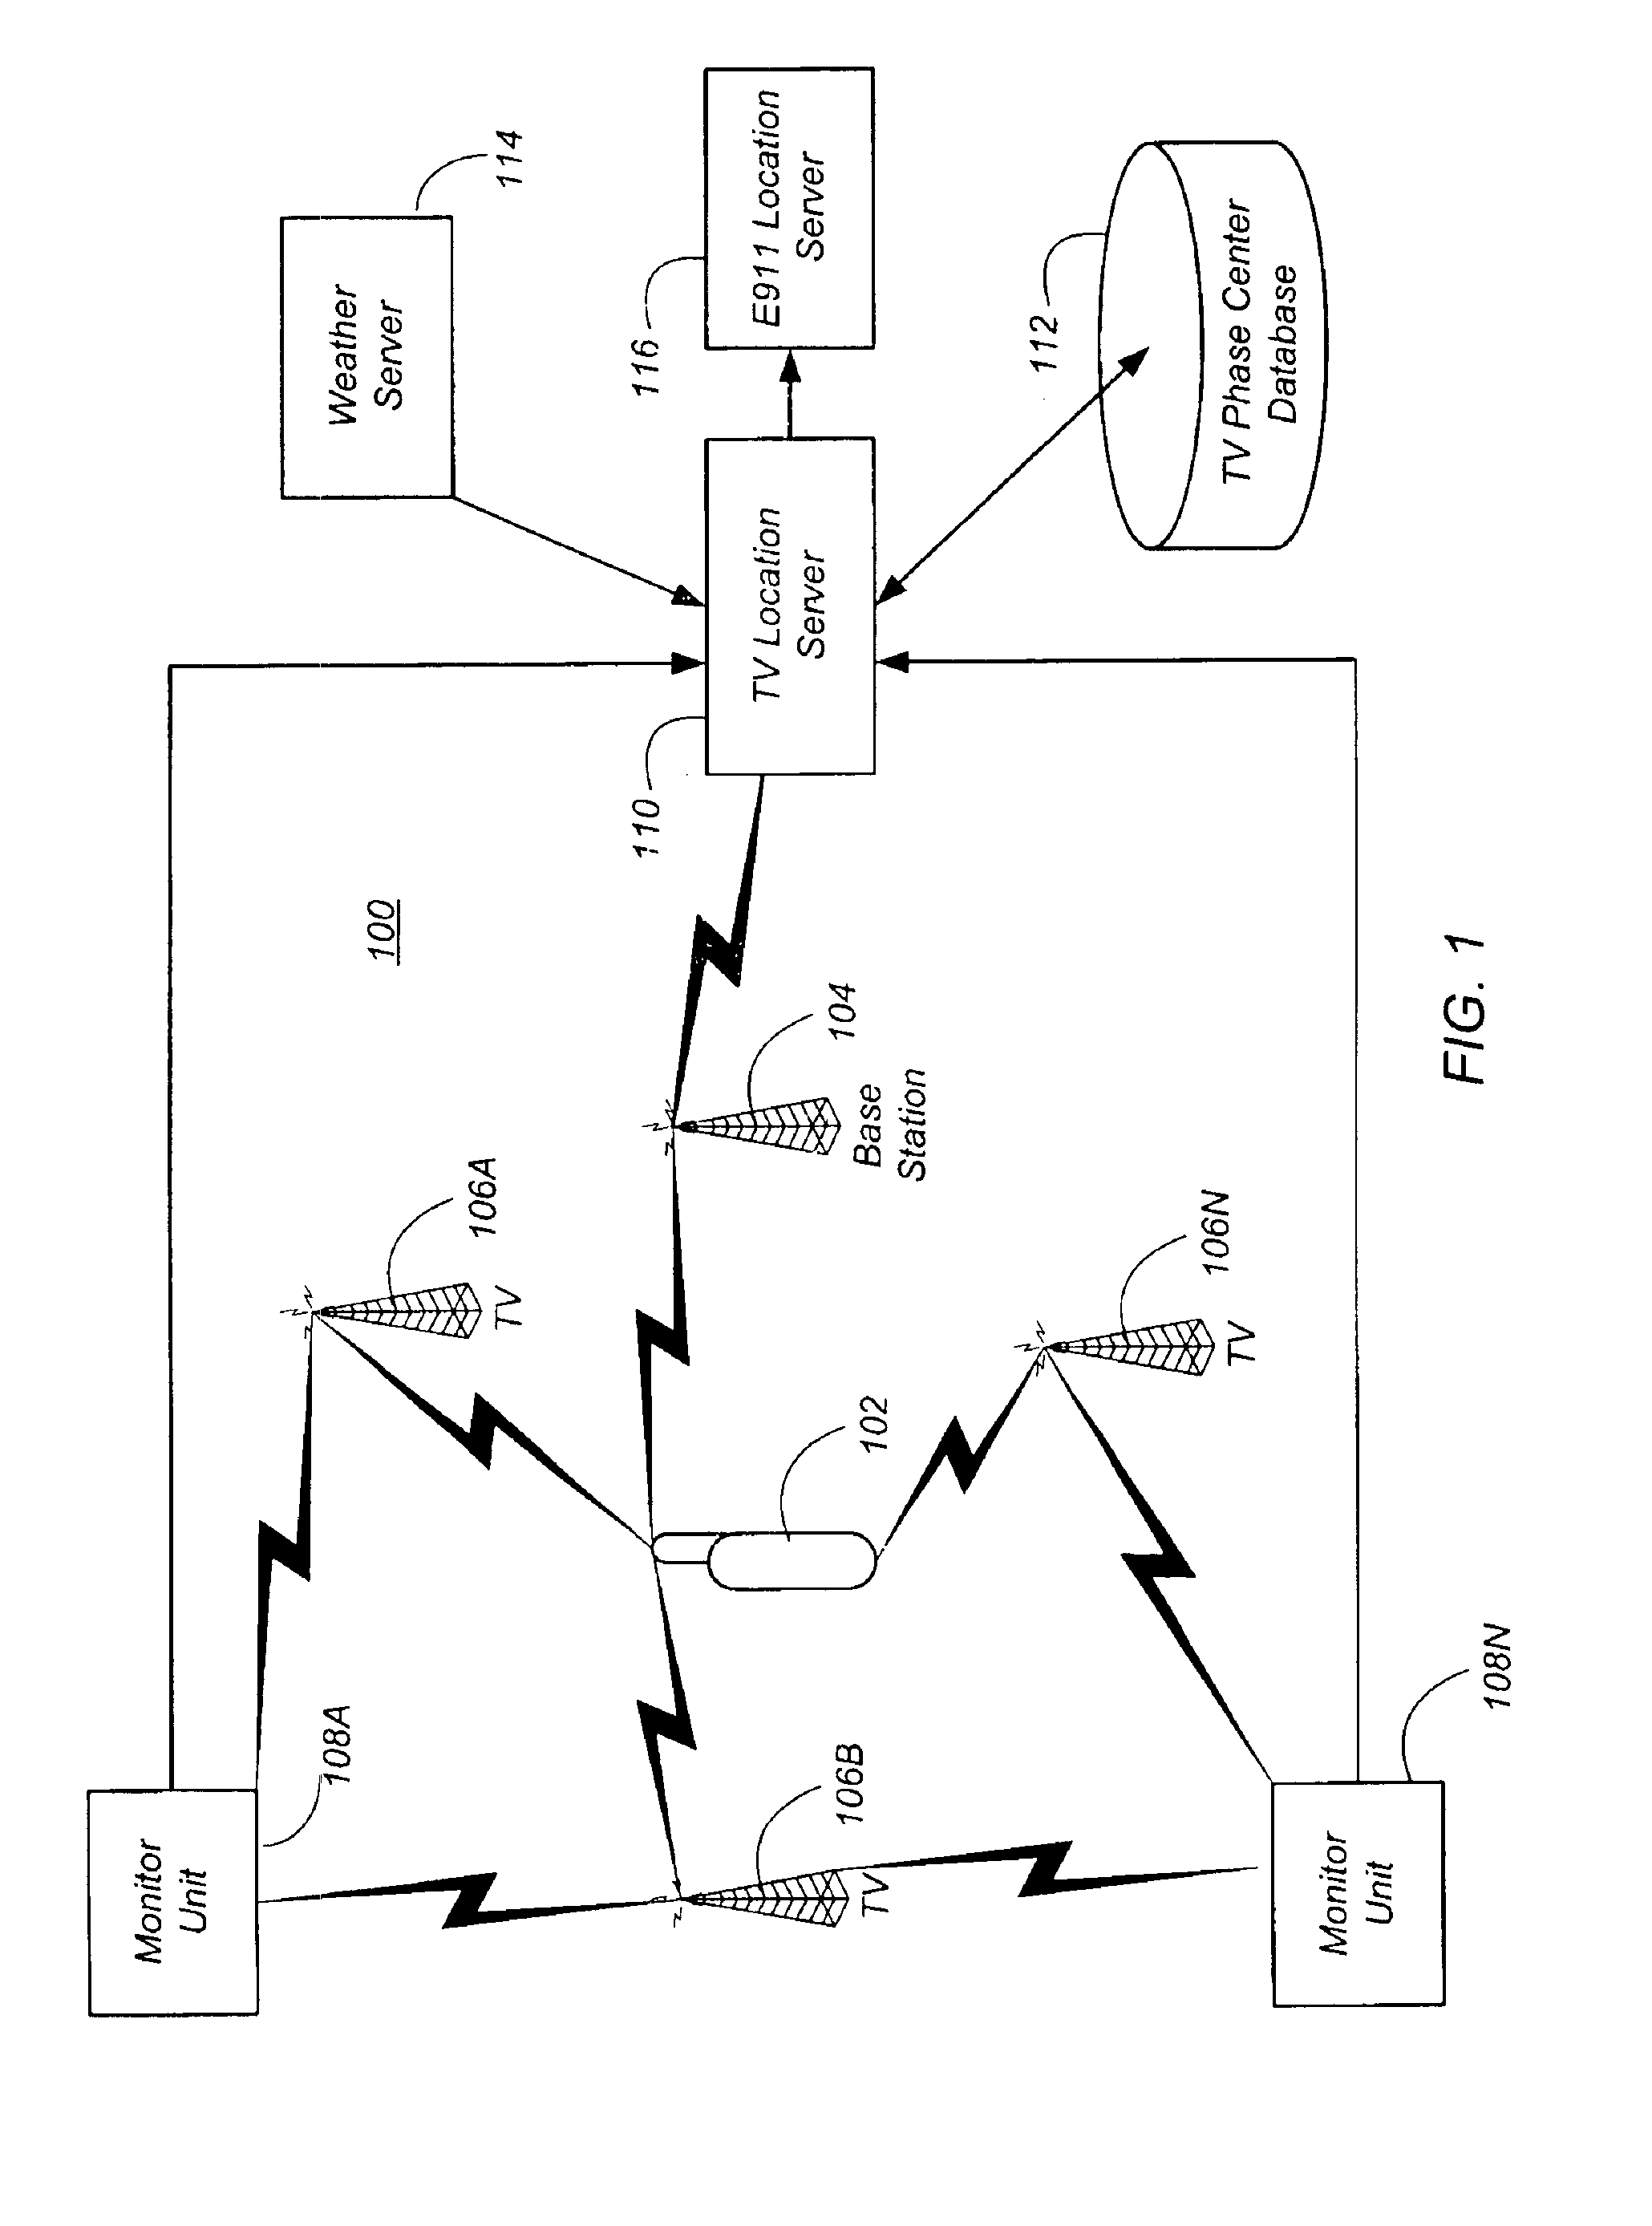 Position location using ghost canceling reference television signals